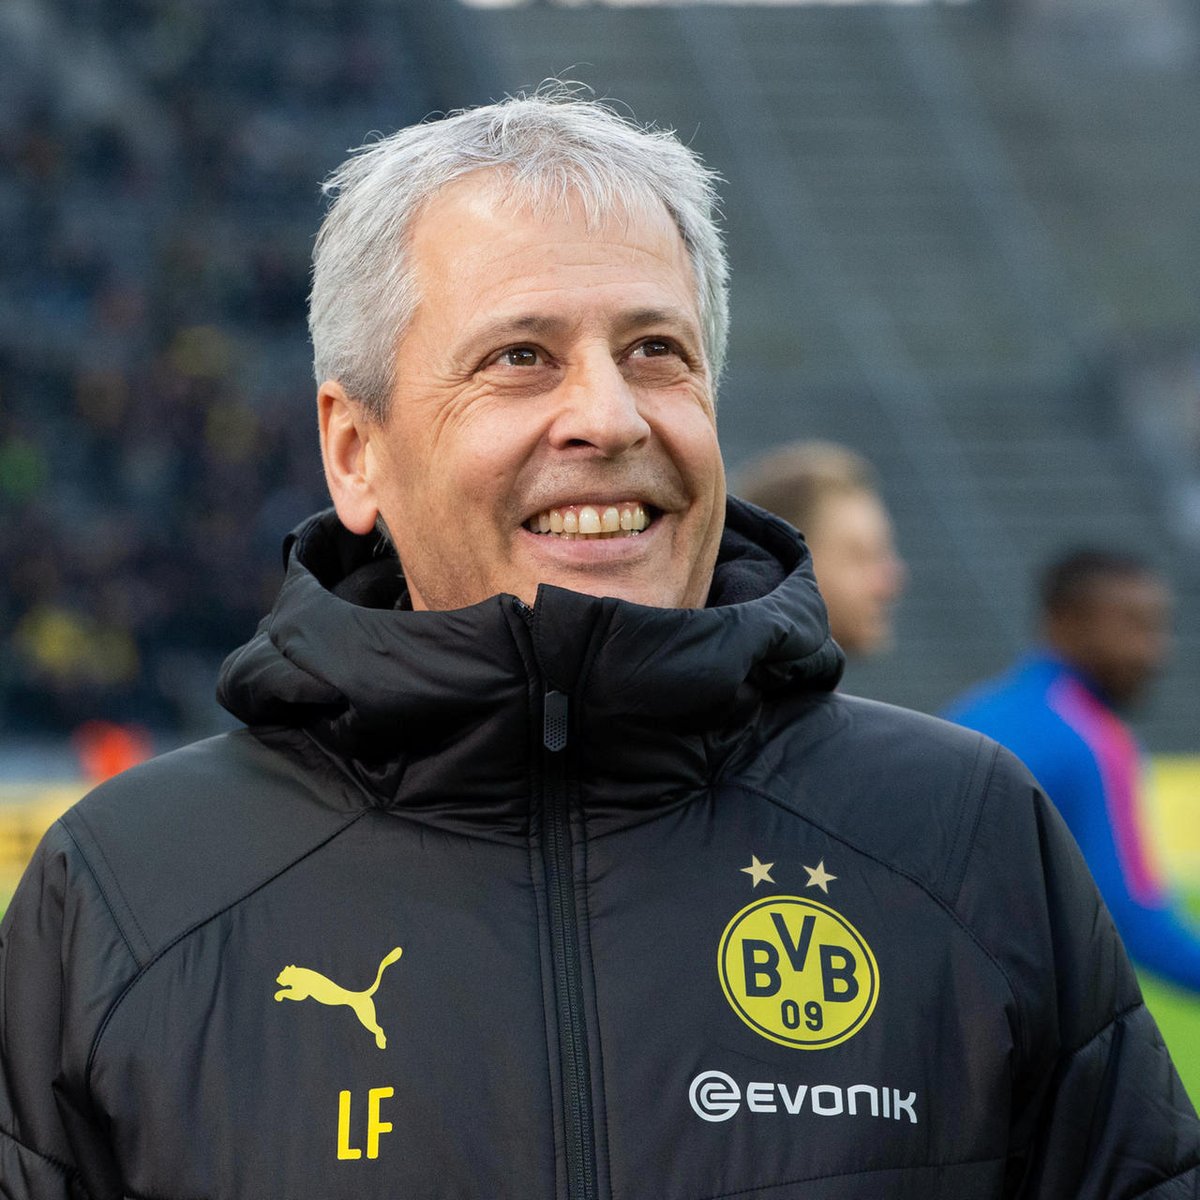 The team is a great mix of talent and experience. Used in the right way it can, at least in  #FM20, be really successful. Favre tried different tactics to balance the team. In the end he mostly used a 4-3-3, which he adapted depending on the situation. [ #BVB]